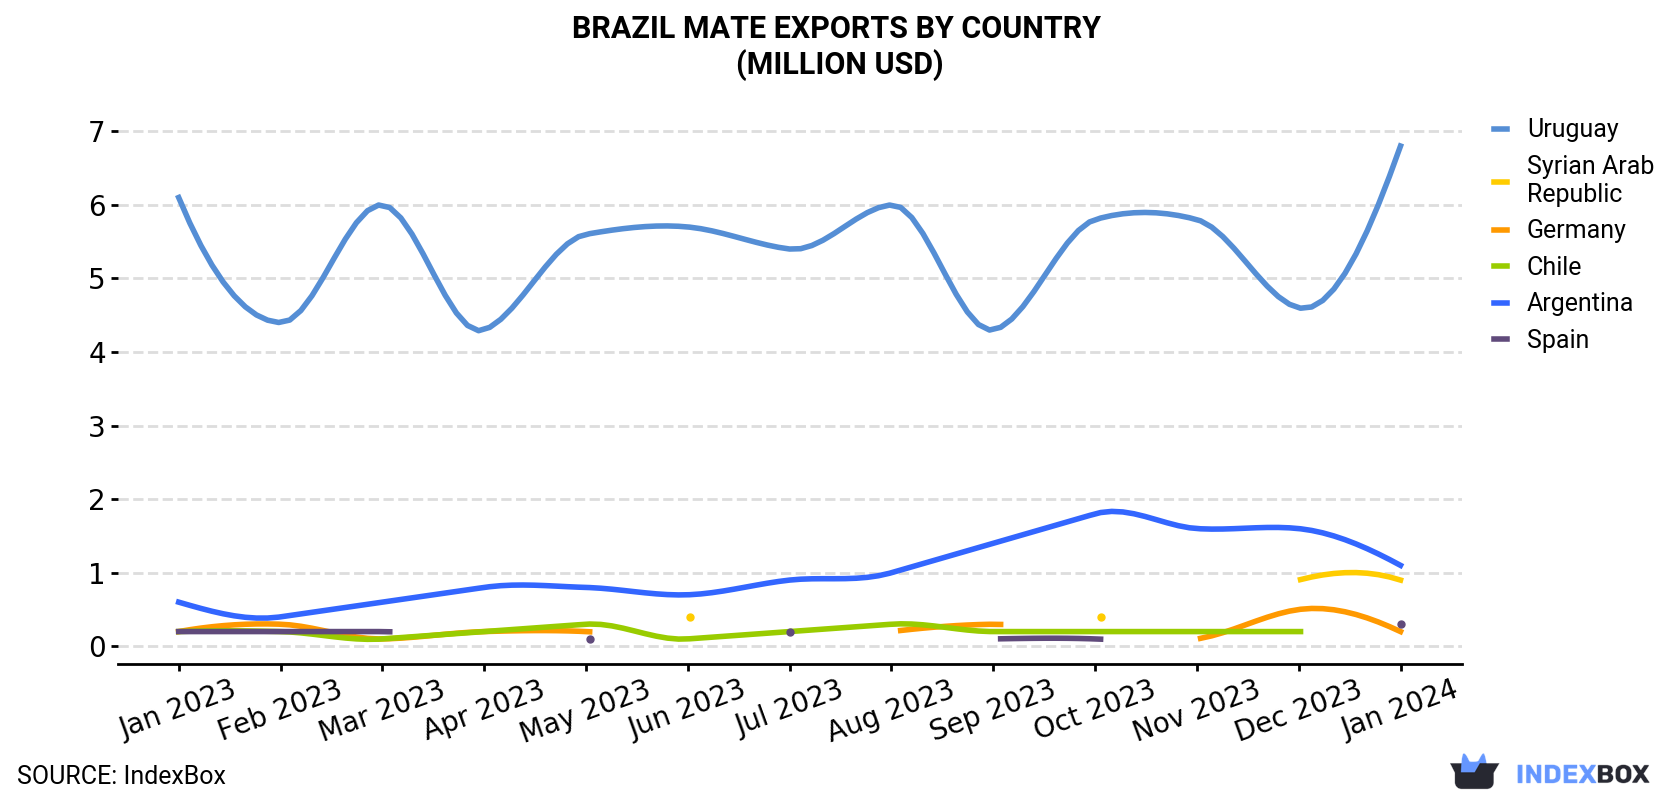 Brazil Mate Exports By Country (Million USD)